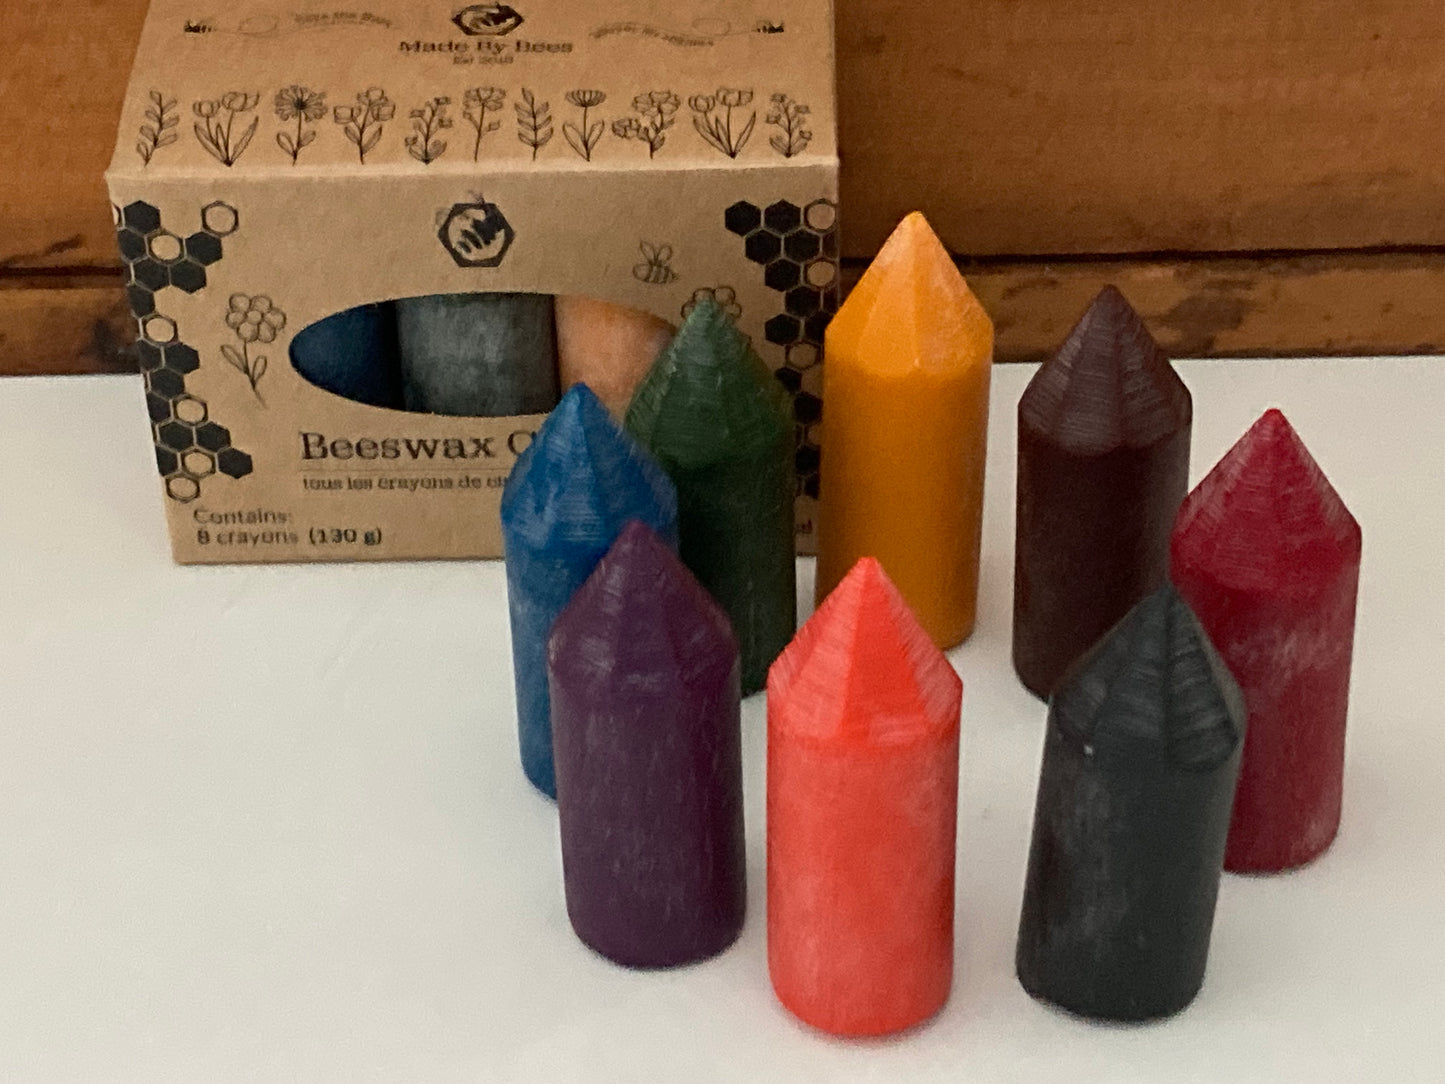 BEESWAX CRAYONS, Art - for Little Hands, 8 colours!